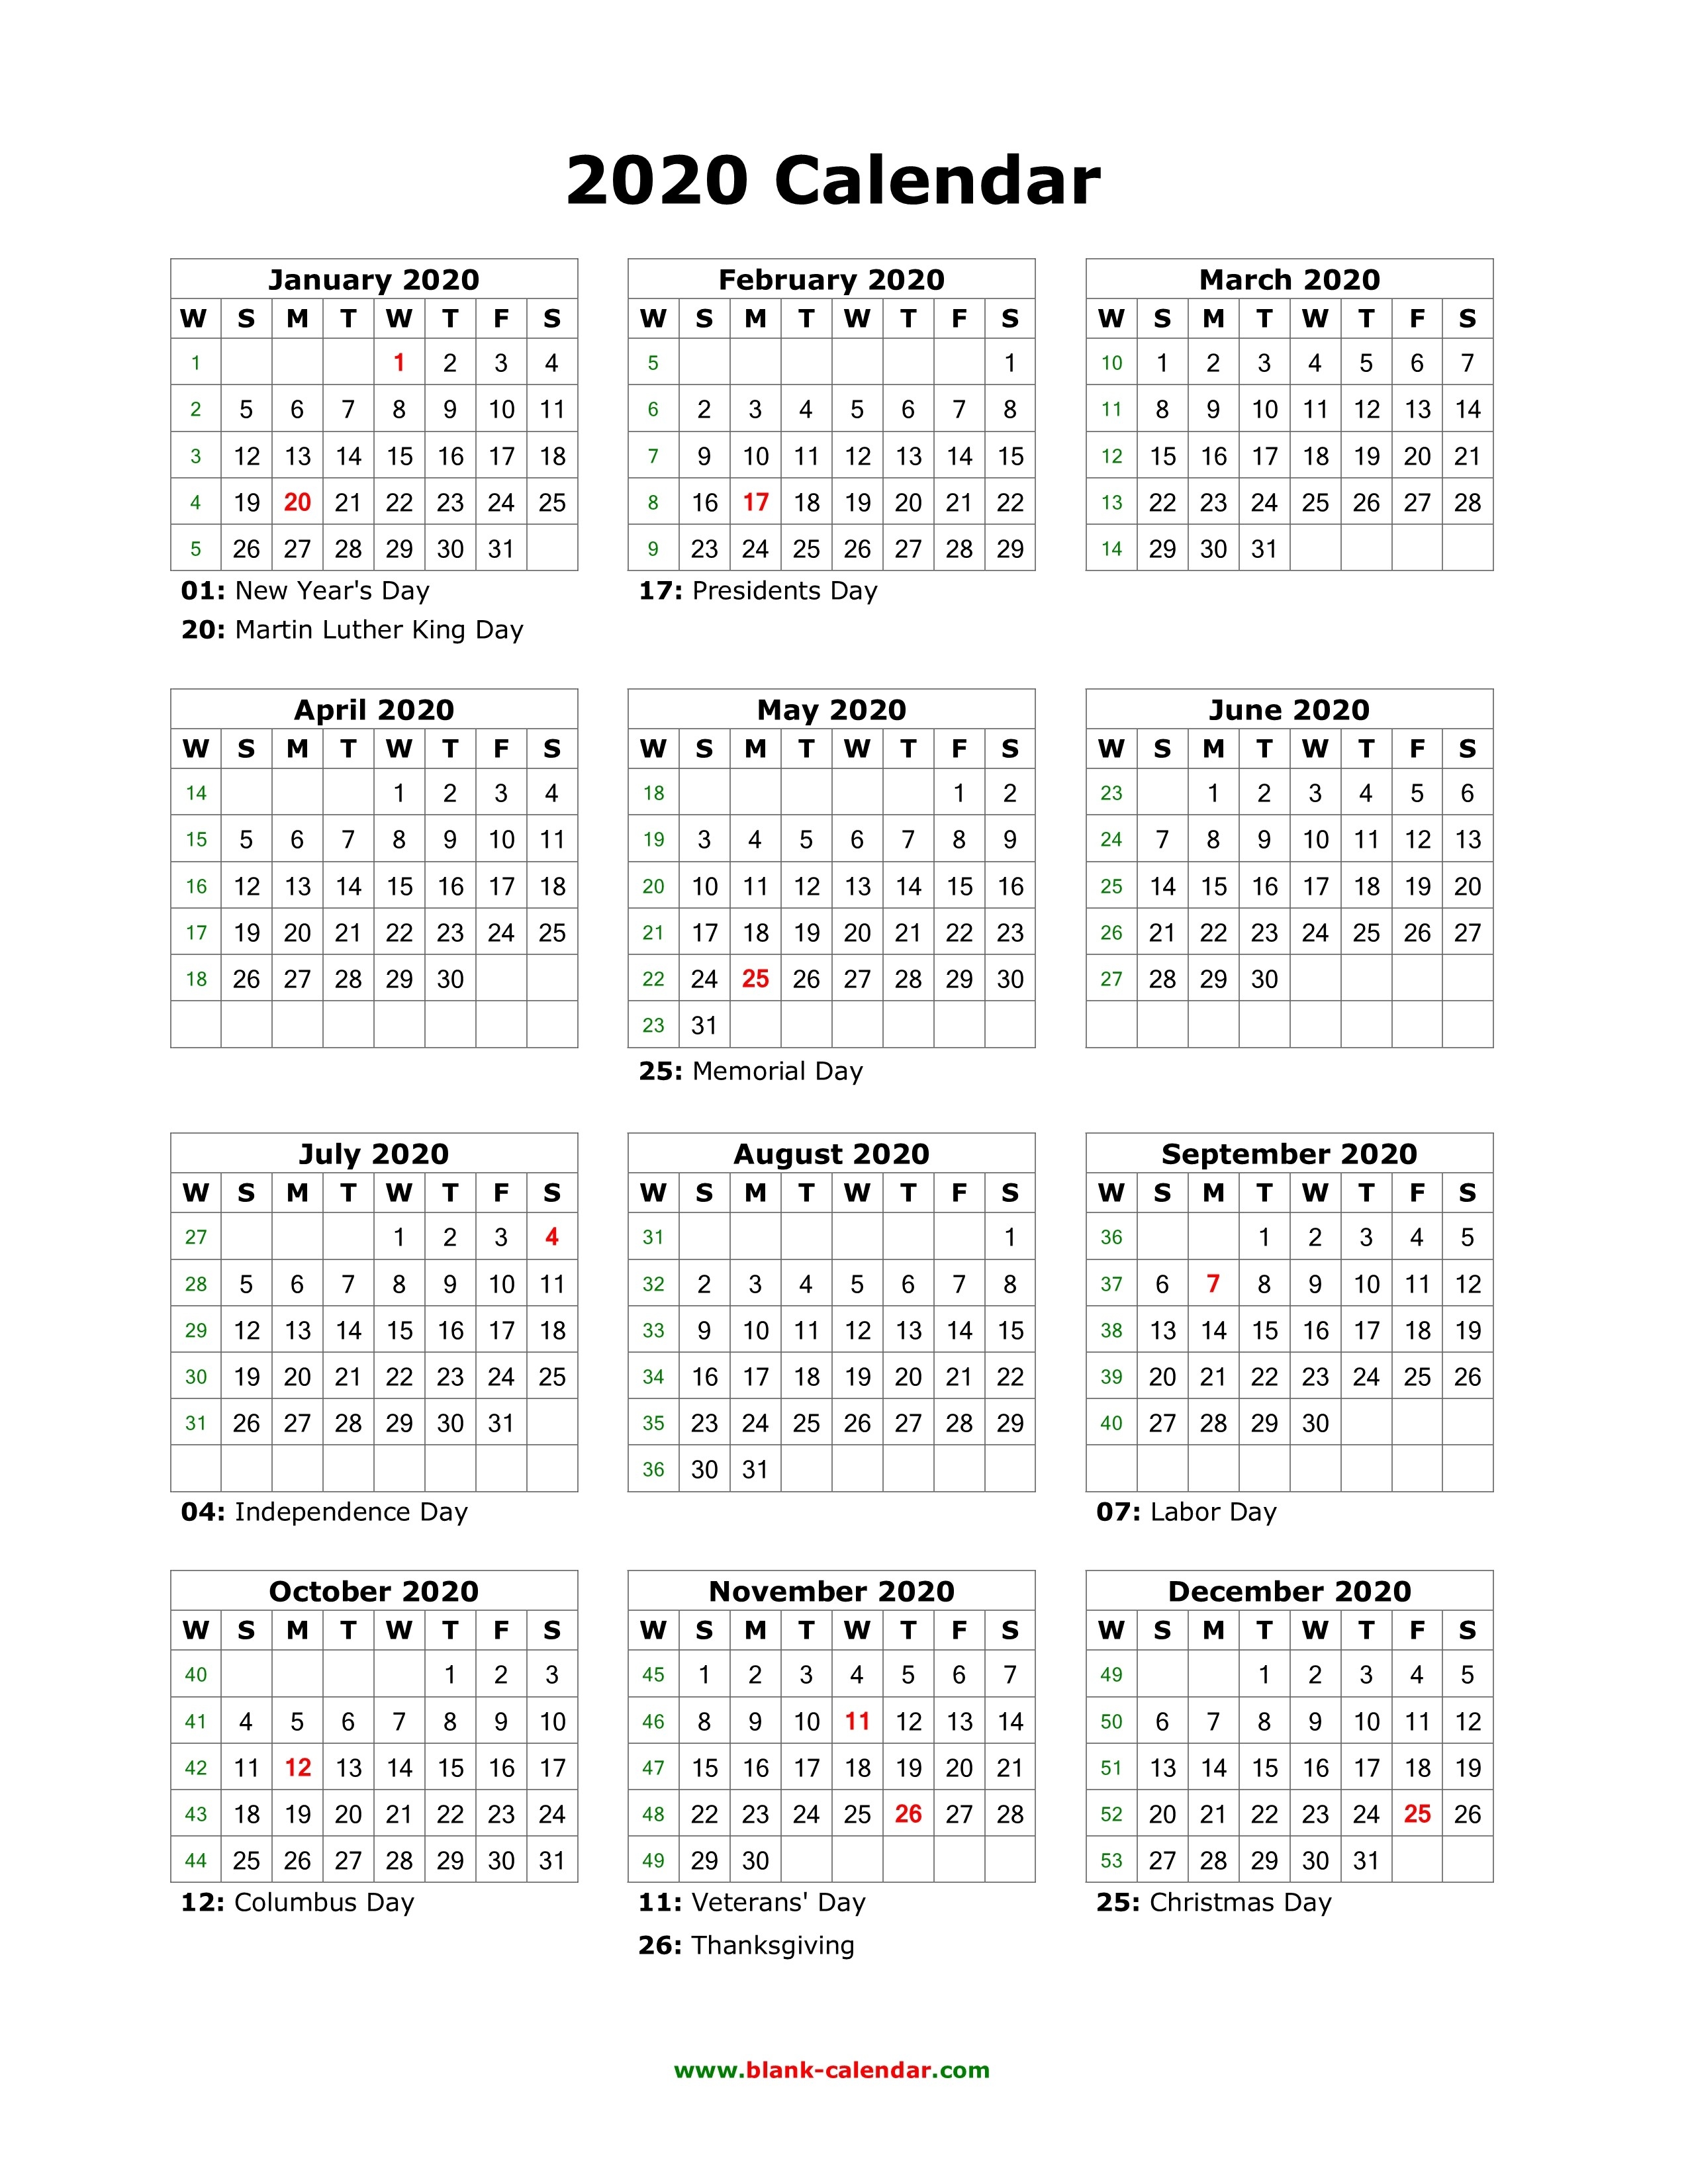 Download Blank Calendar 2020 With Us Holidays (12 Months On-Calendar 2020 Us Holidays